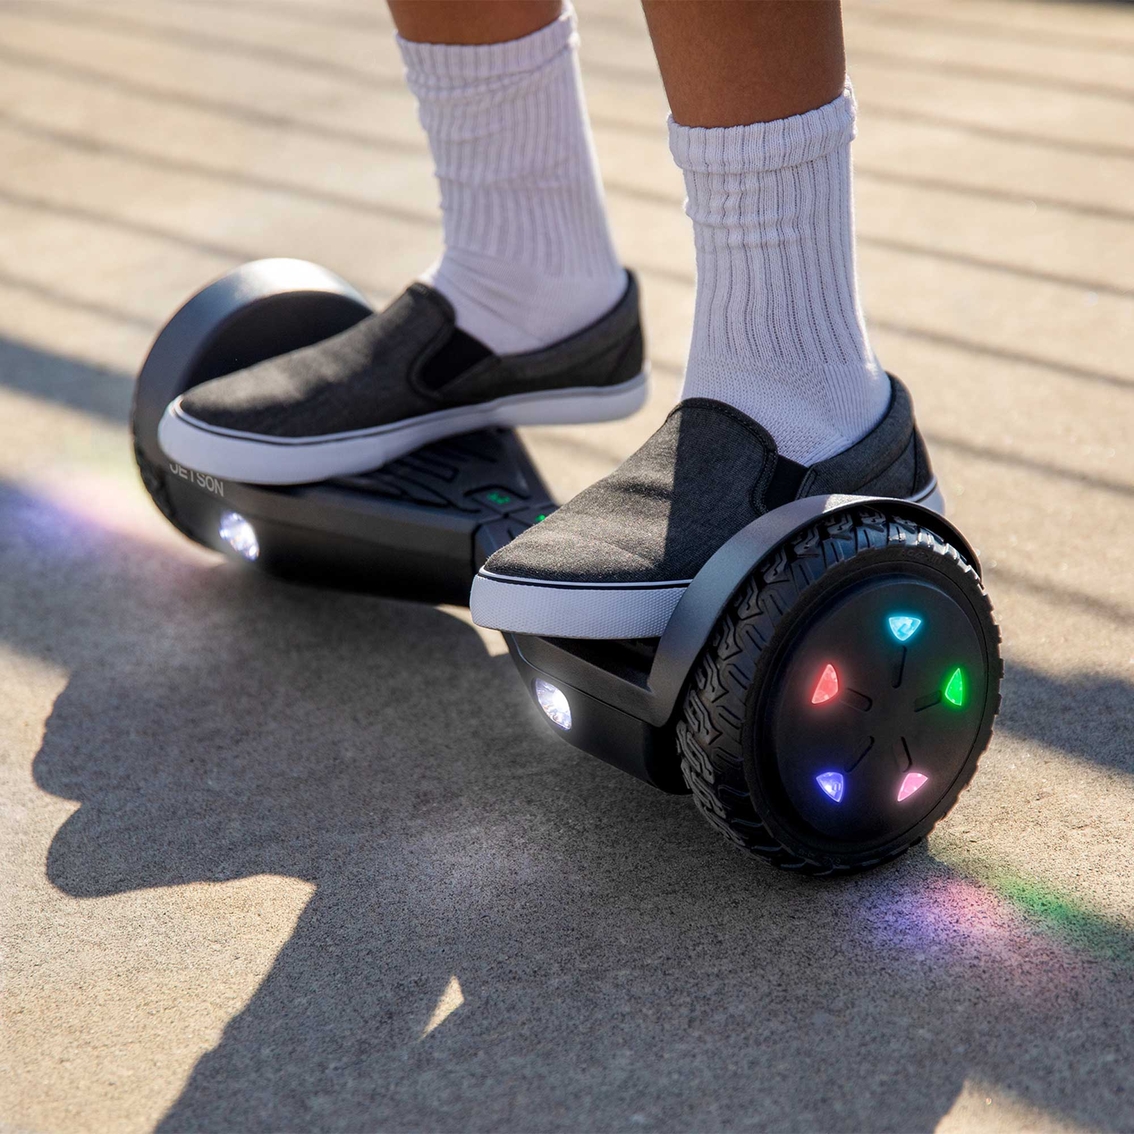 Jetson Aero Hoverboard with LED Lights - Image 9 of 9